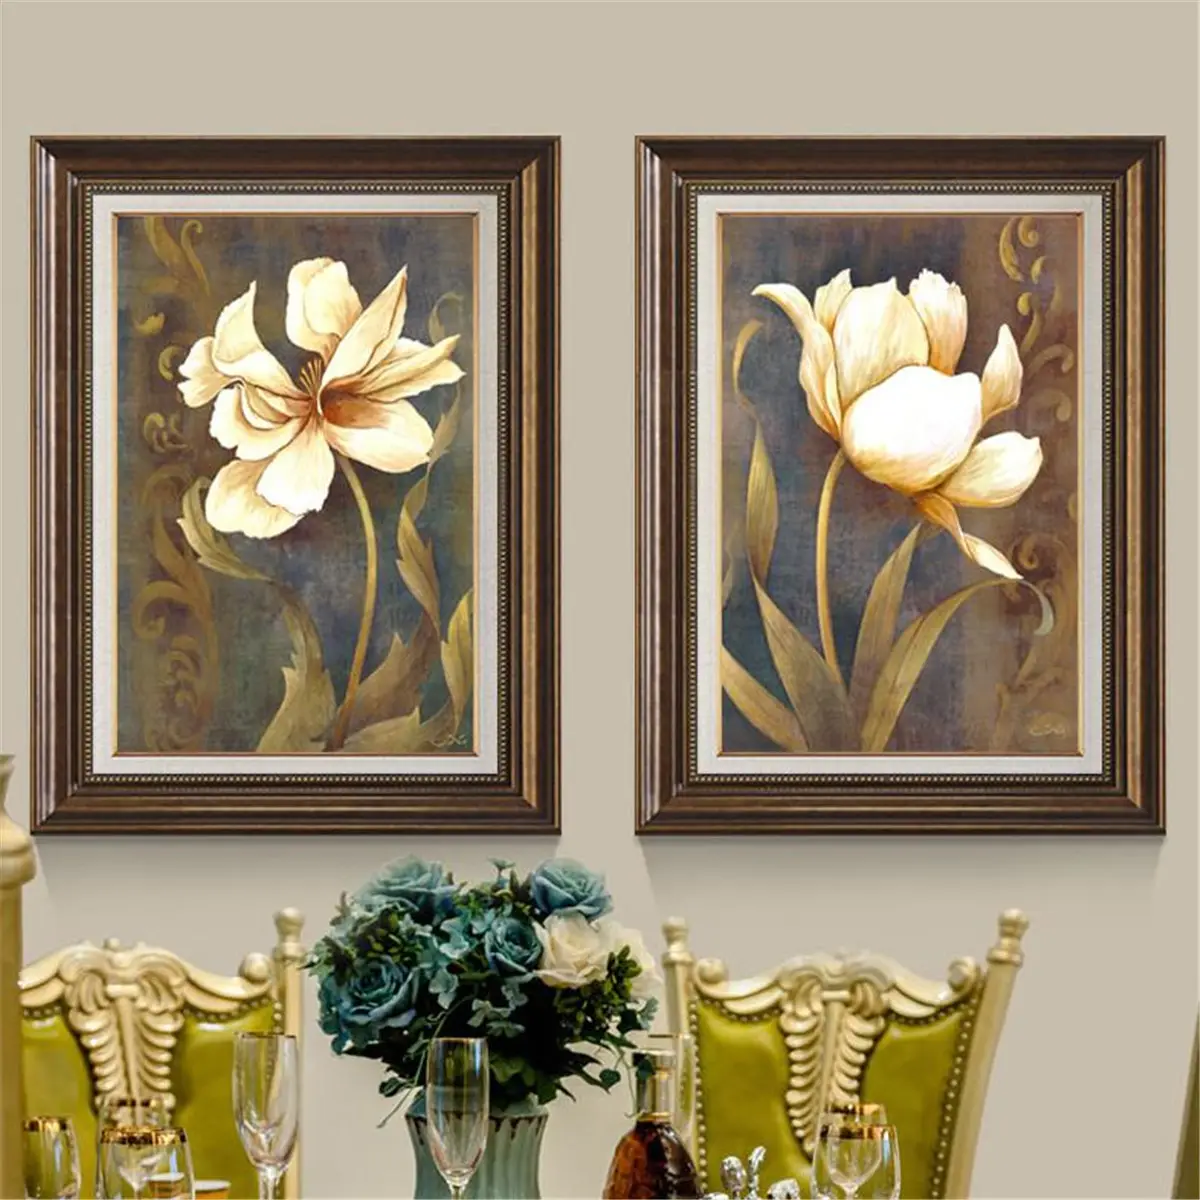 Retro Luxury Flowers Art Print Canvas Poster Picture Home Bedroom Wall Art Decor